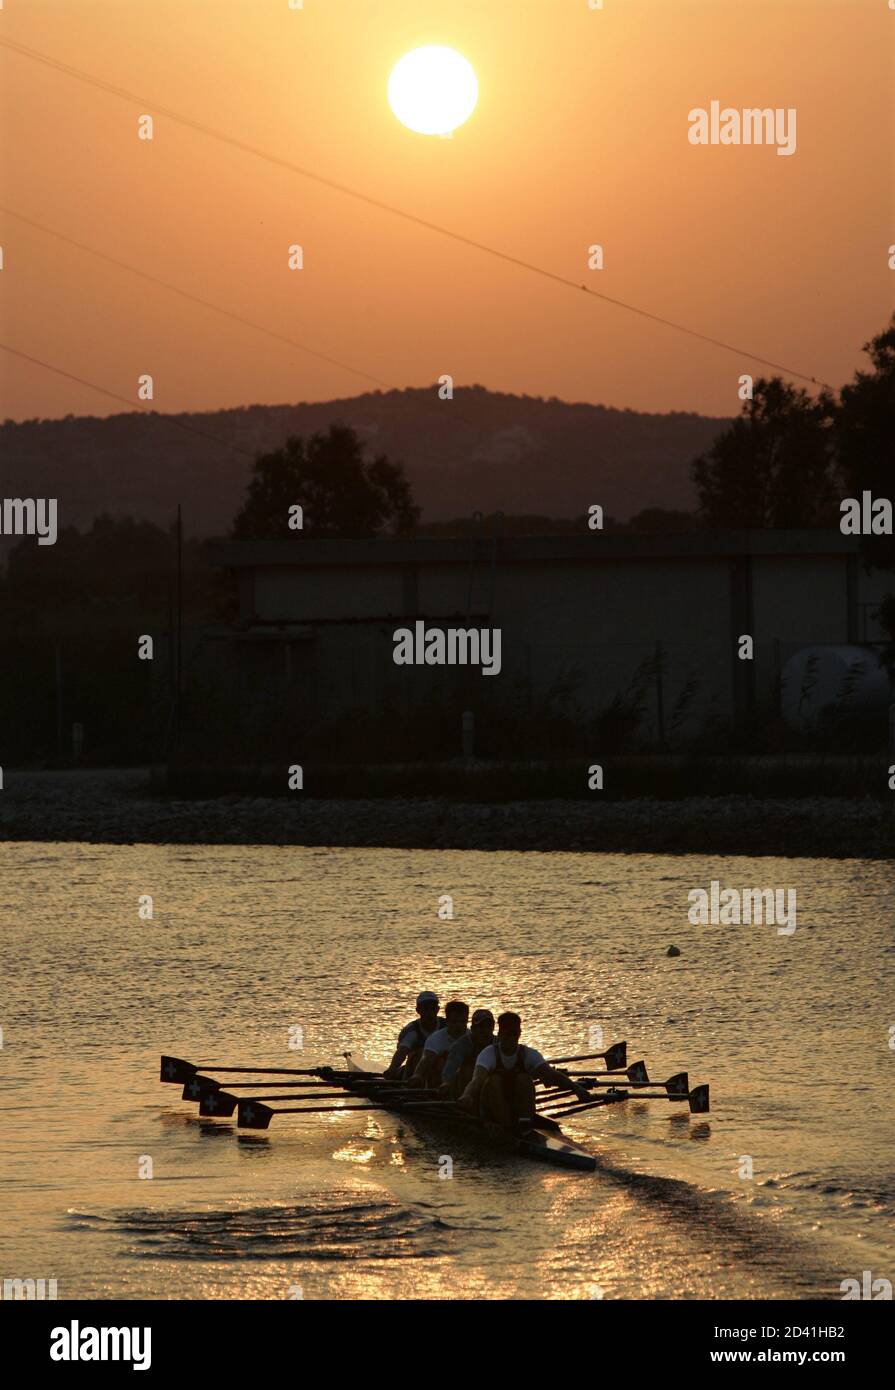 Members of the Swiss men's quadruple scull train as the sun rises over the Schinias Olympic Rowing Centre prior to competition at the Athens 2004 Olympics, August 15, 2004. REUTERS/Andy Clark  AC/DL Stock Photo